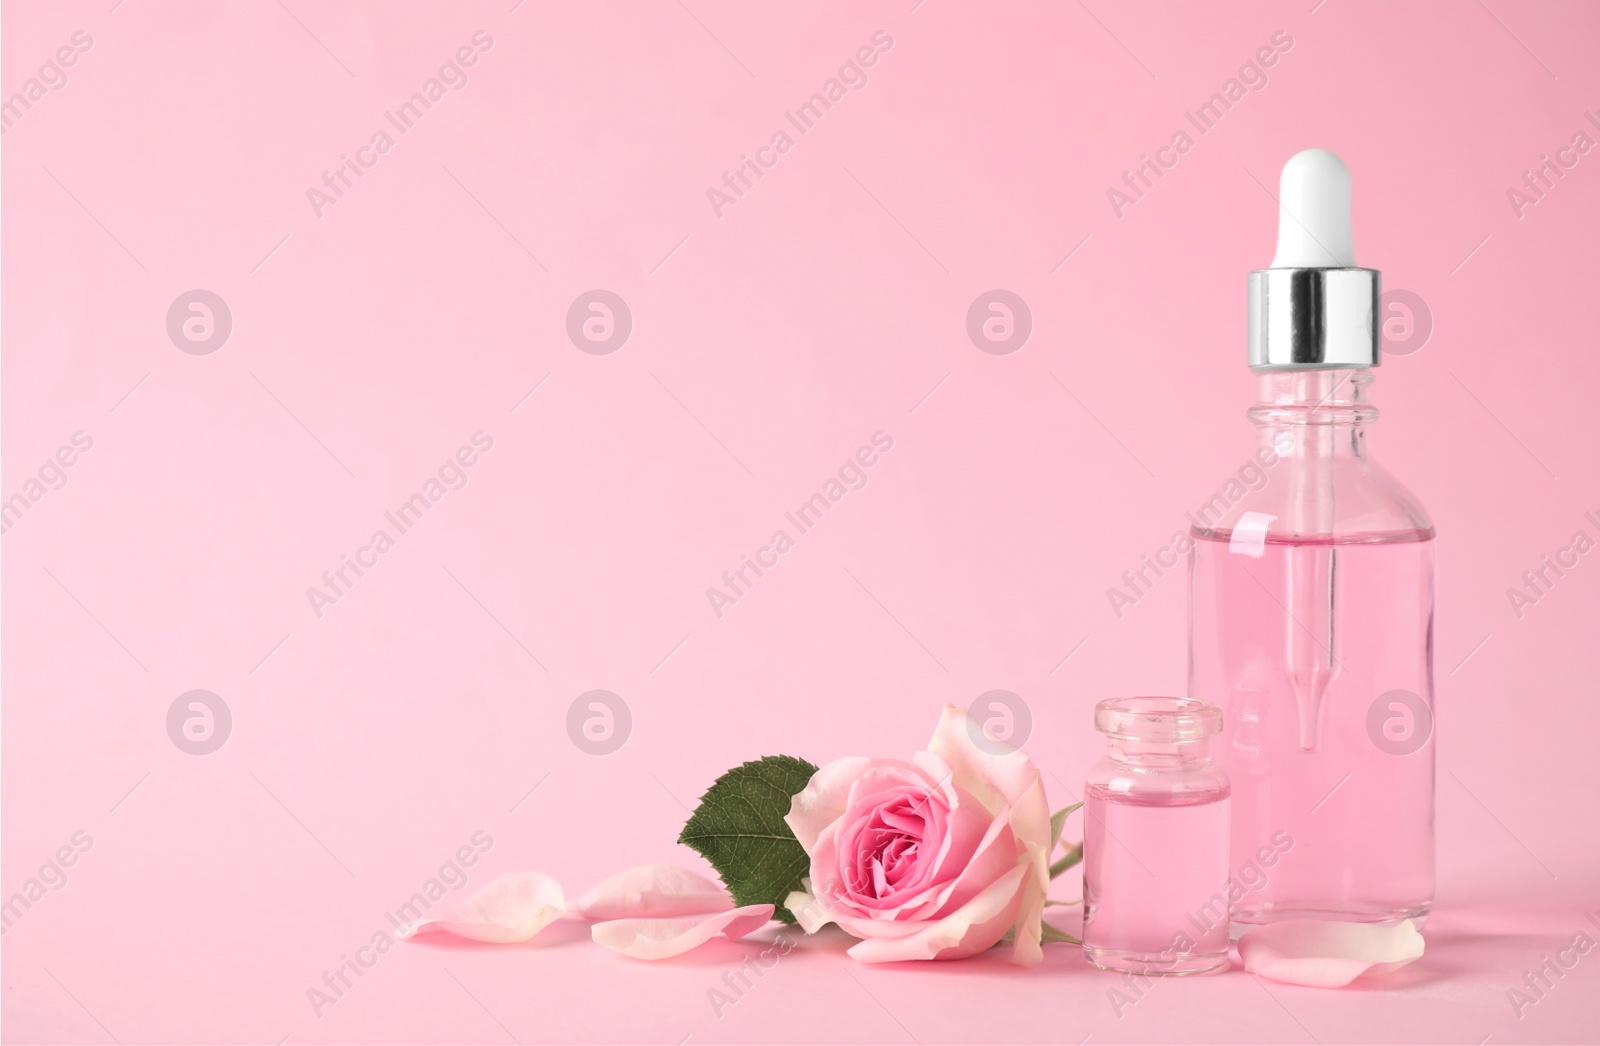 Photo of Bottles of essential oil and rose on pink background. Space for text